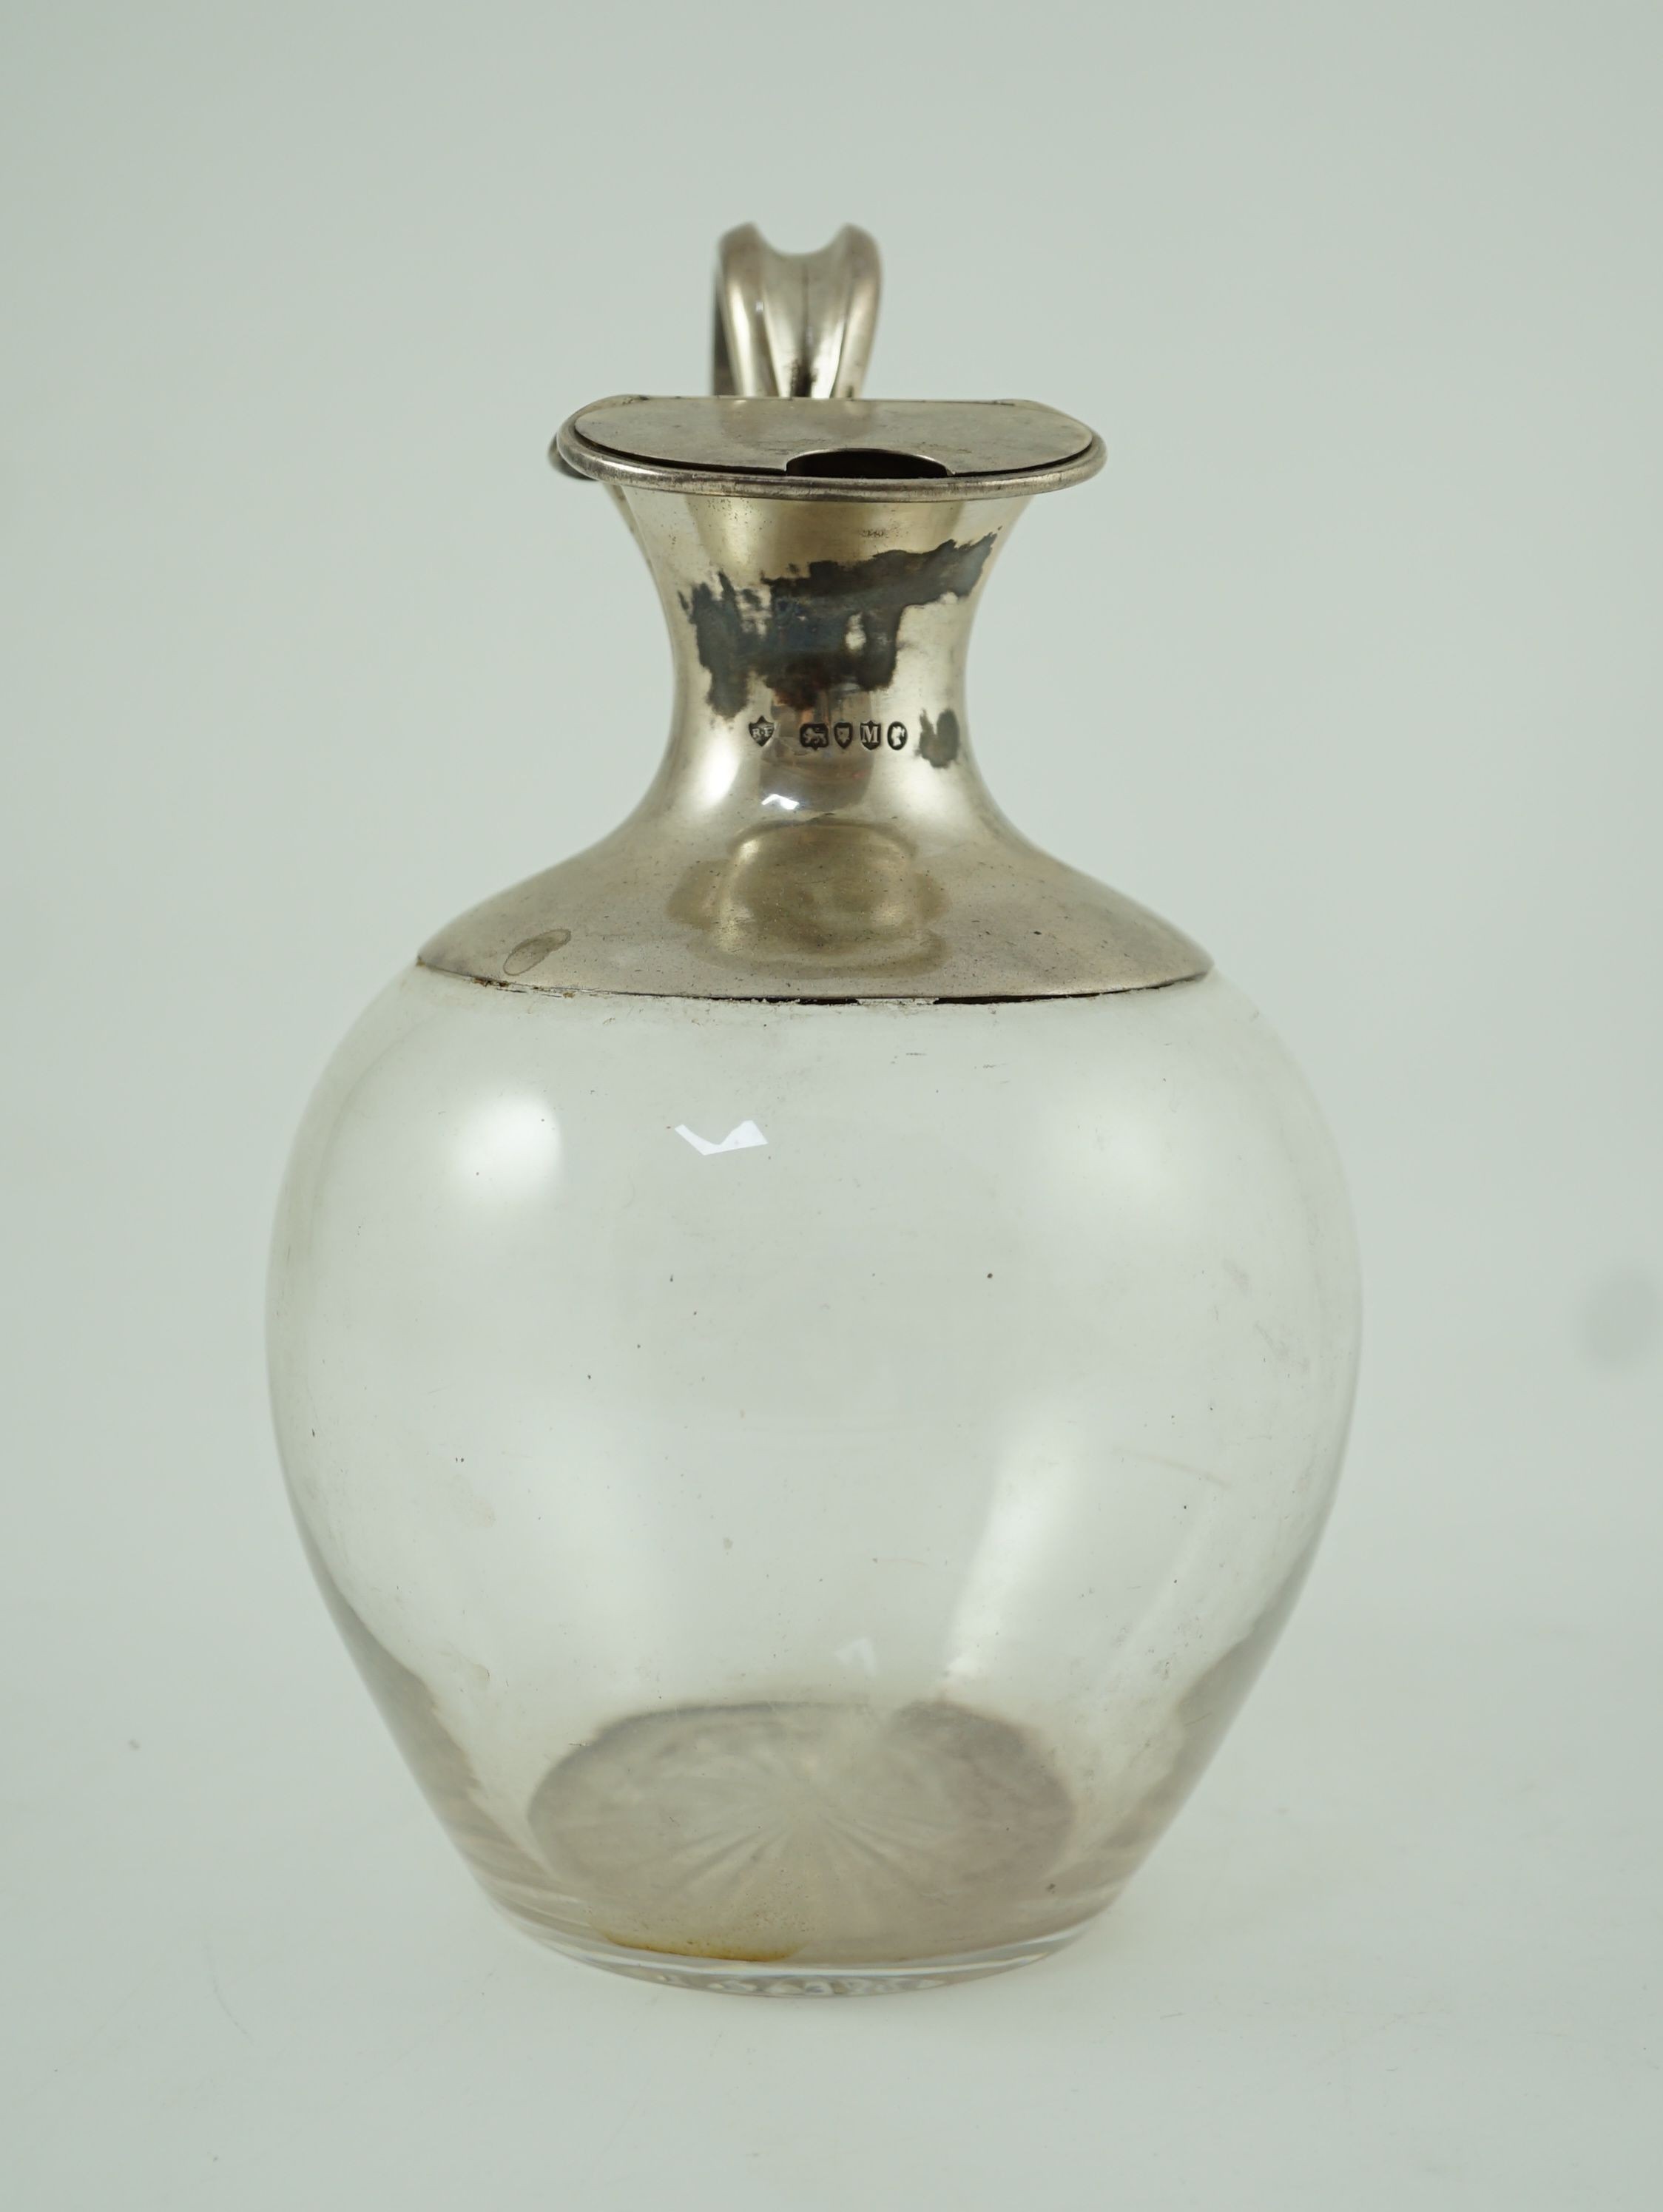 A Victorian silver mounted glass baluster claret jug, by Rupert Favell